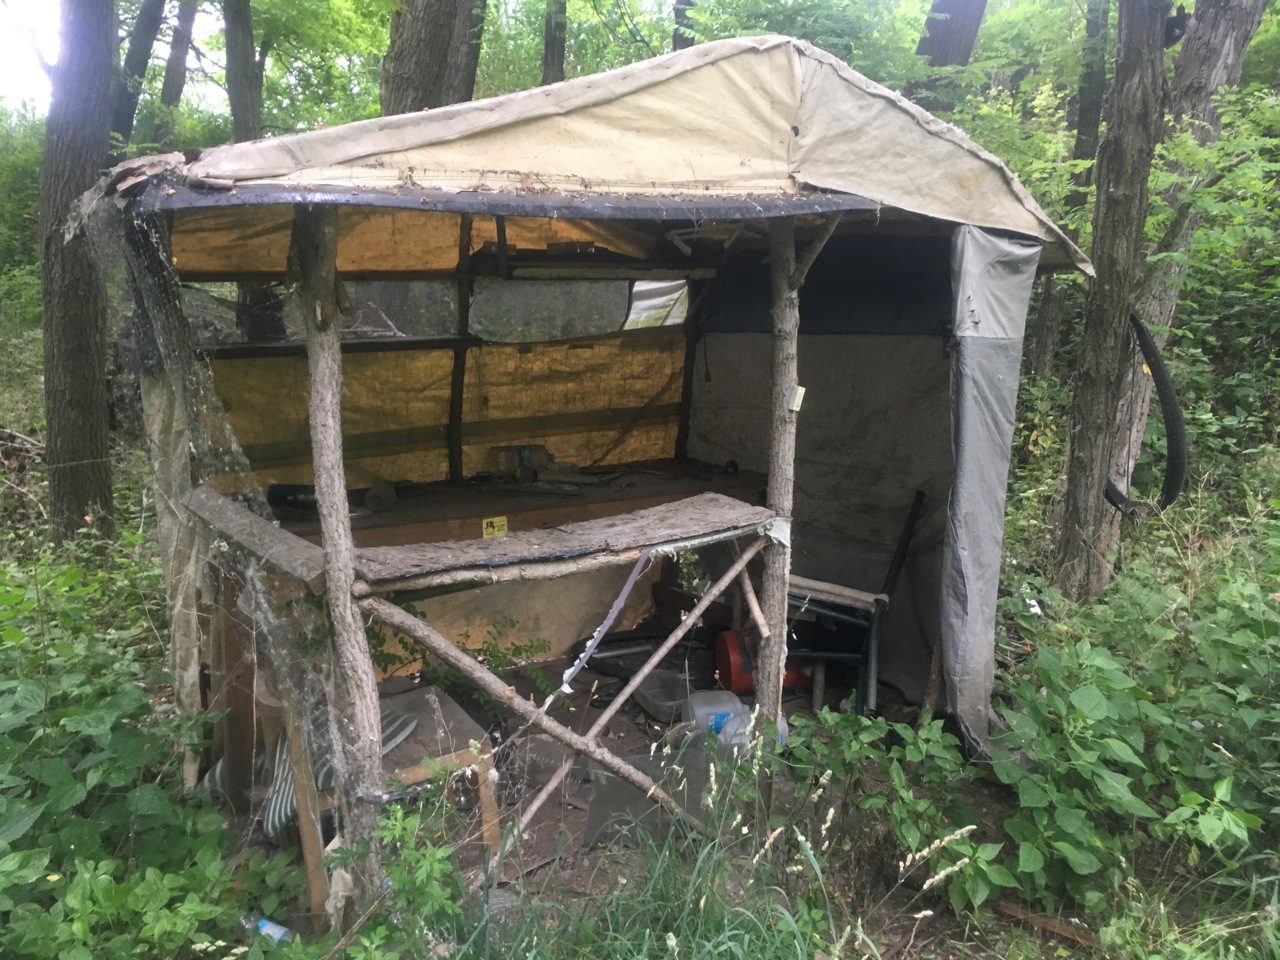 Shelter off the grid